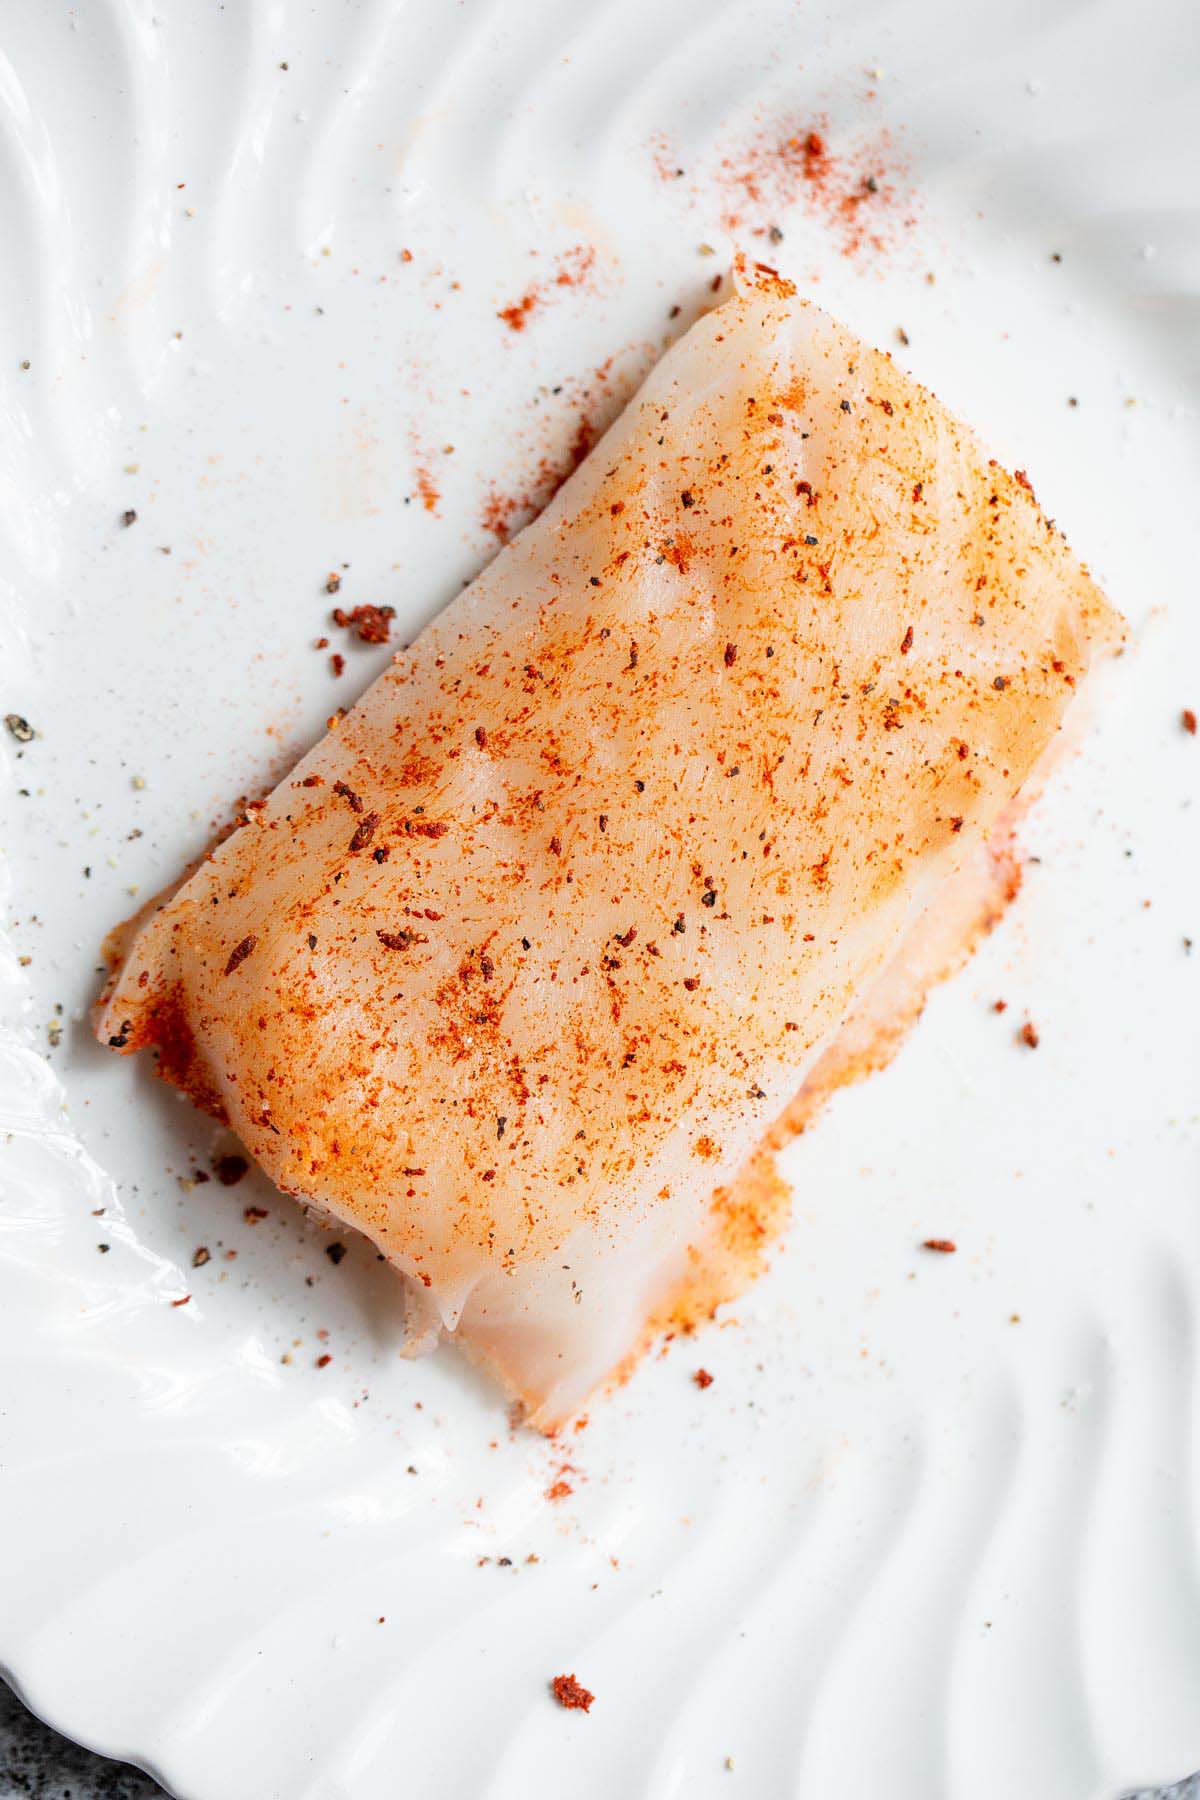 Cod seasoned with salt, pepper, and paprika.